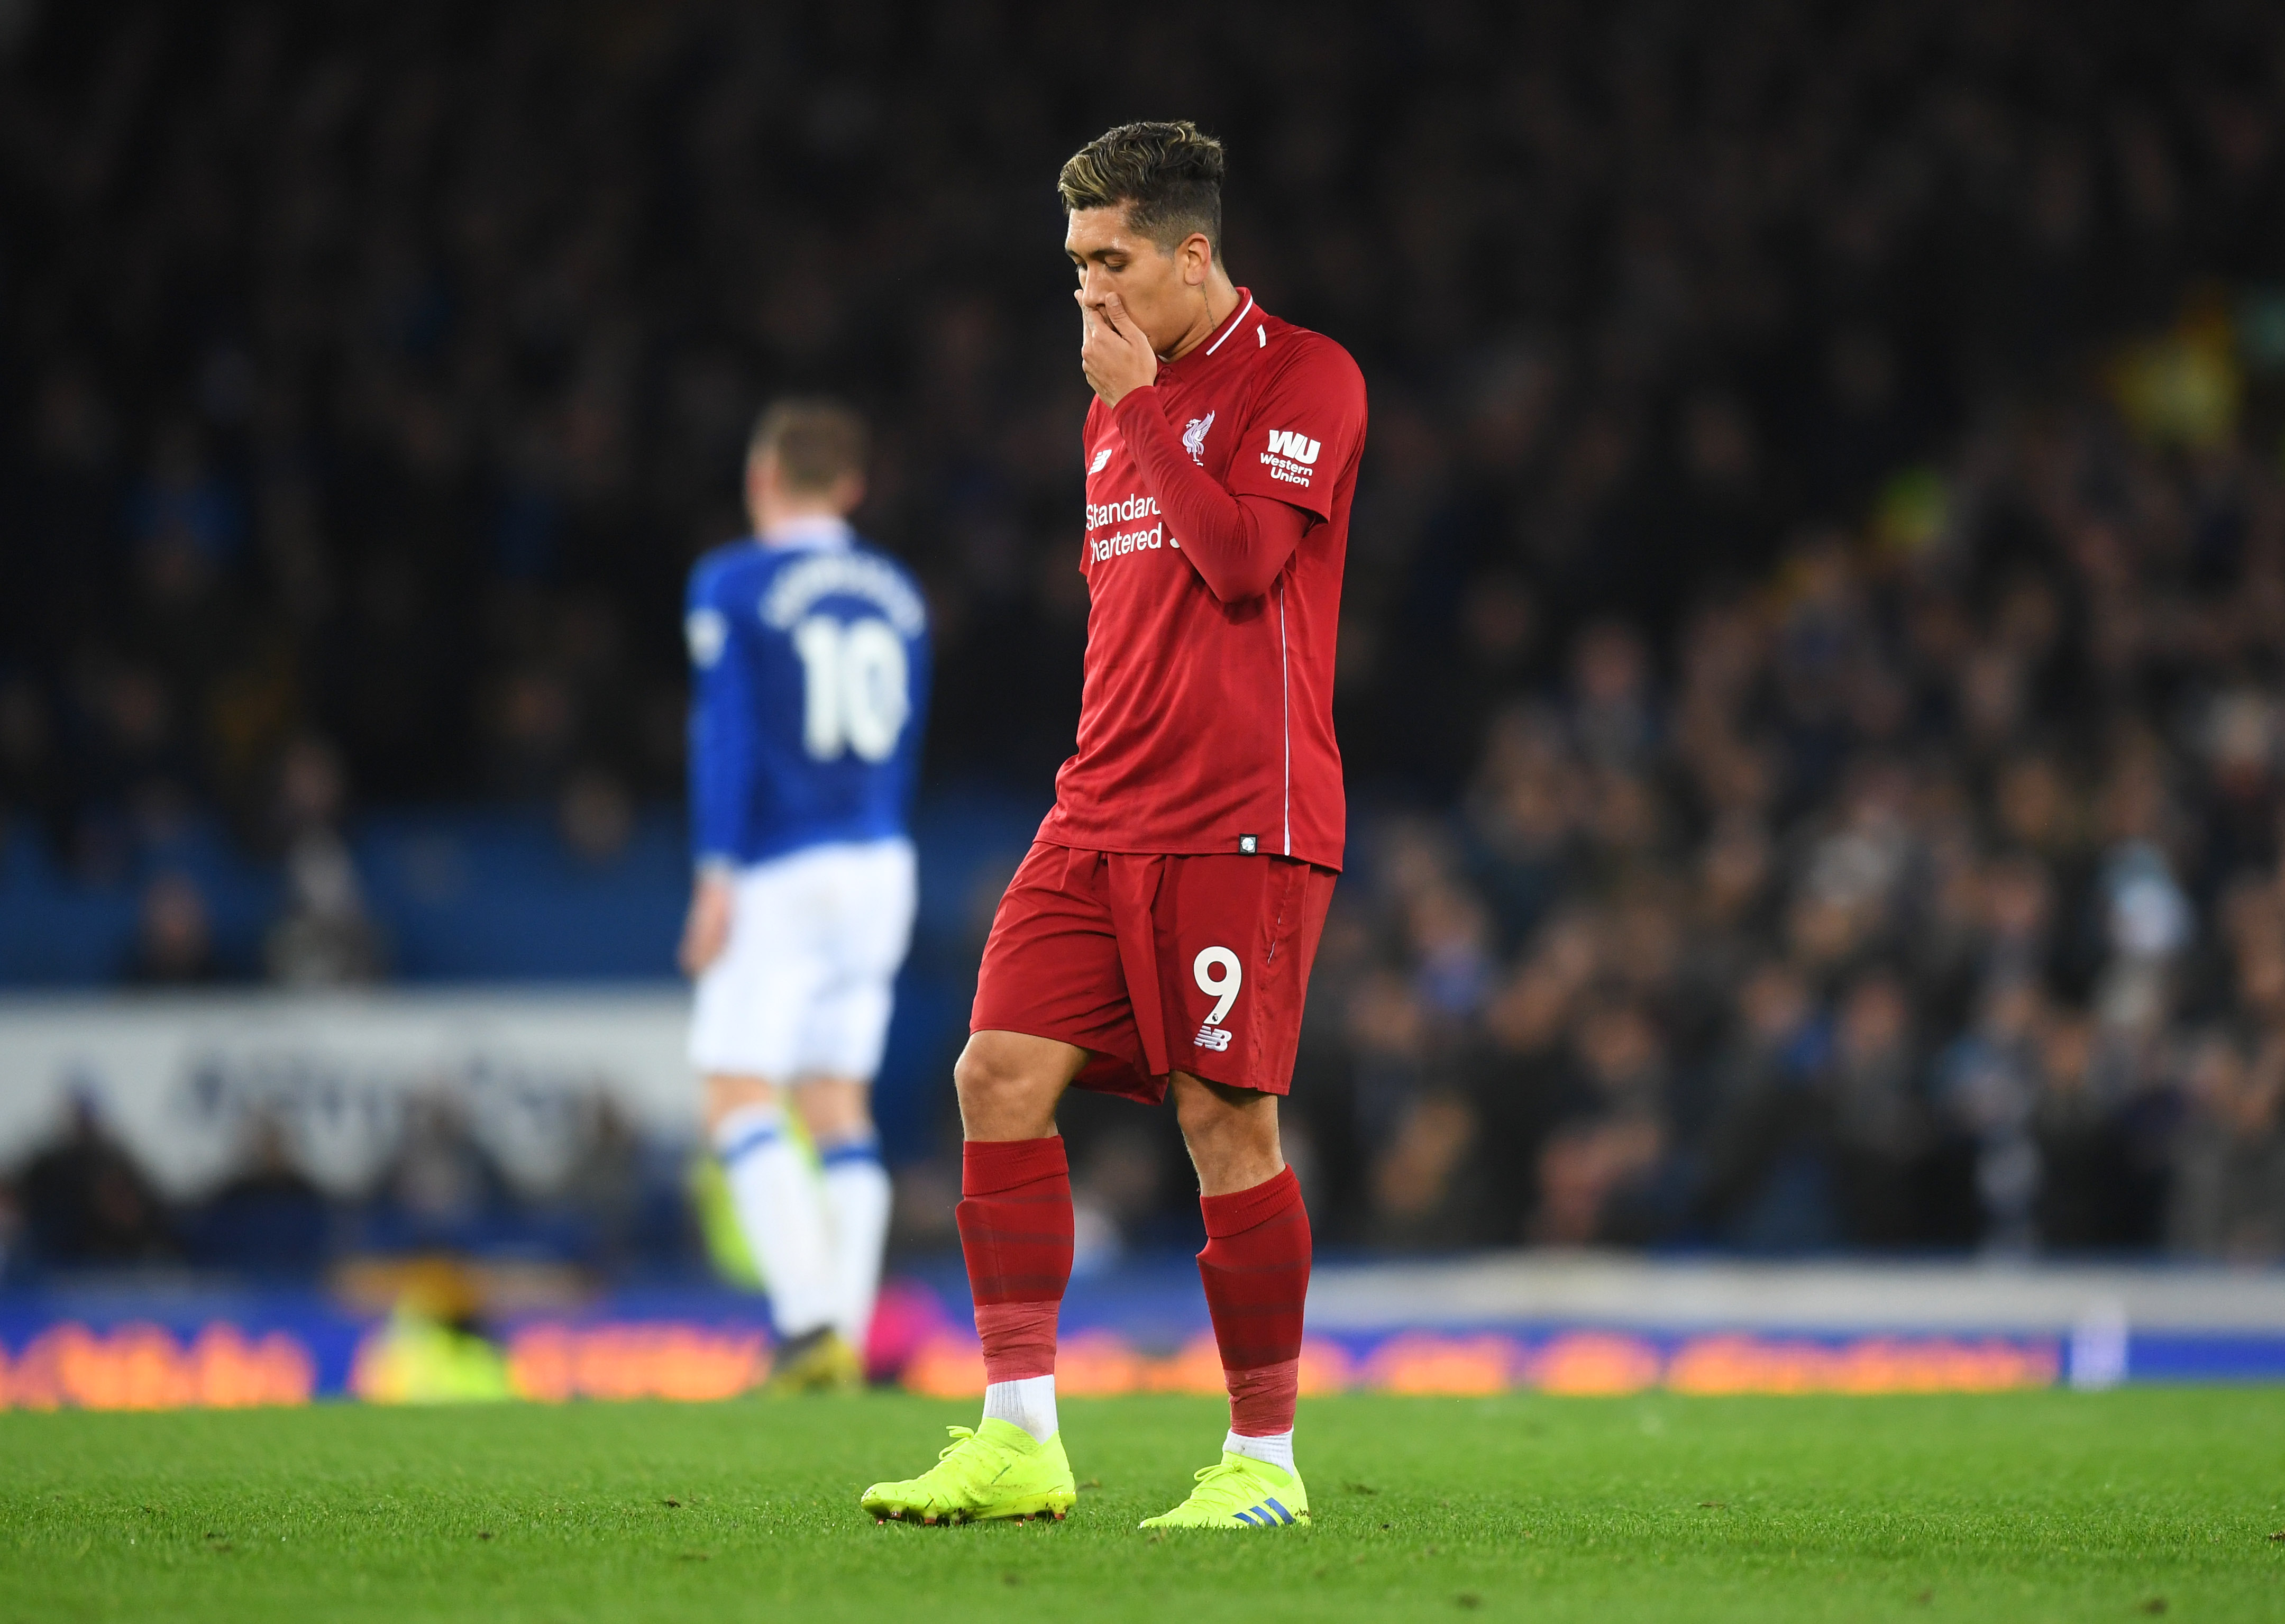 Firmino failed to inspire Liverpool to a win. (Photo by Michael Regan/Getty Images)